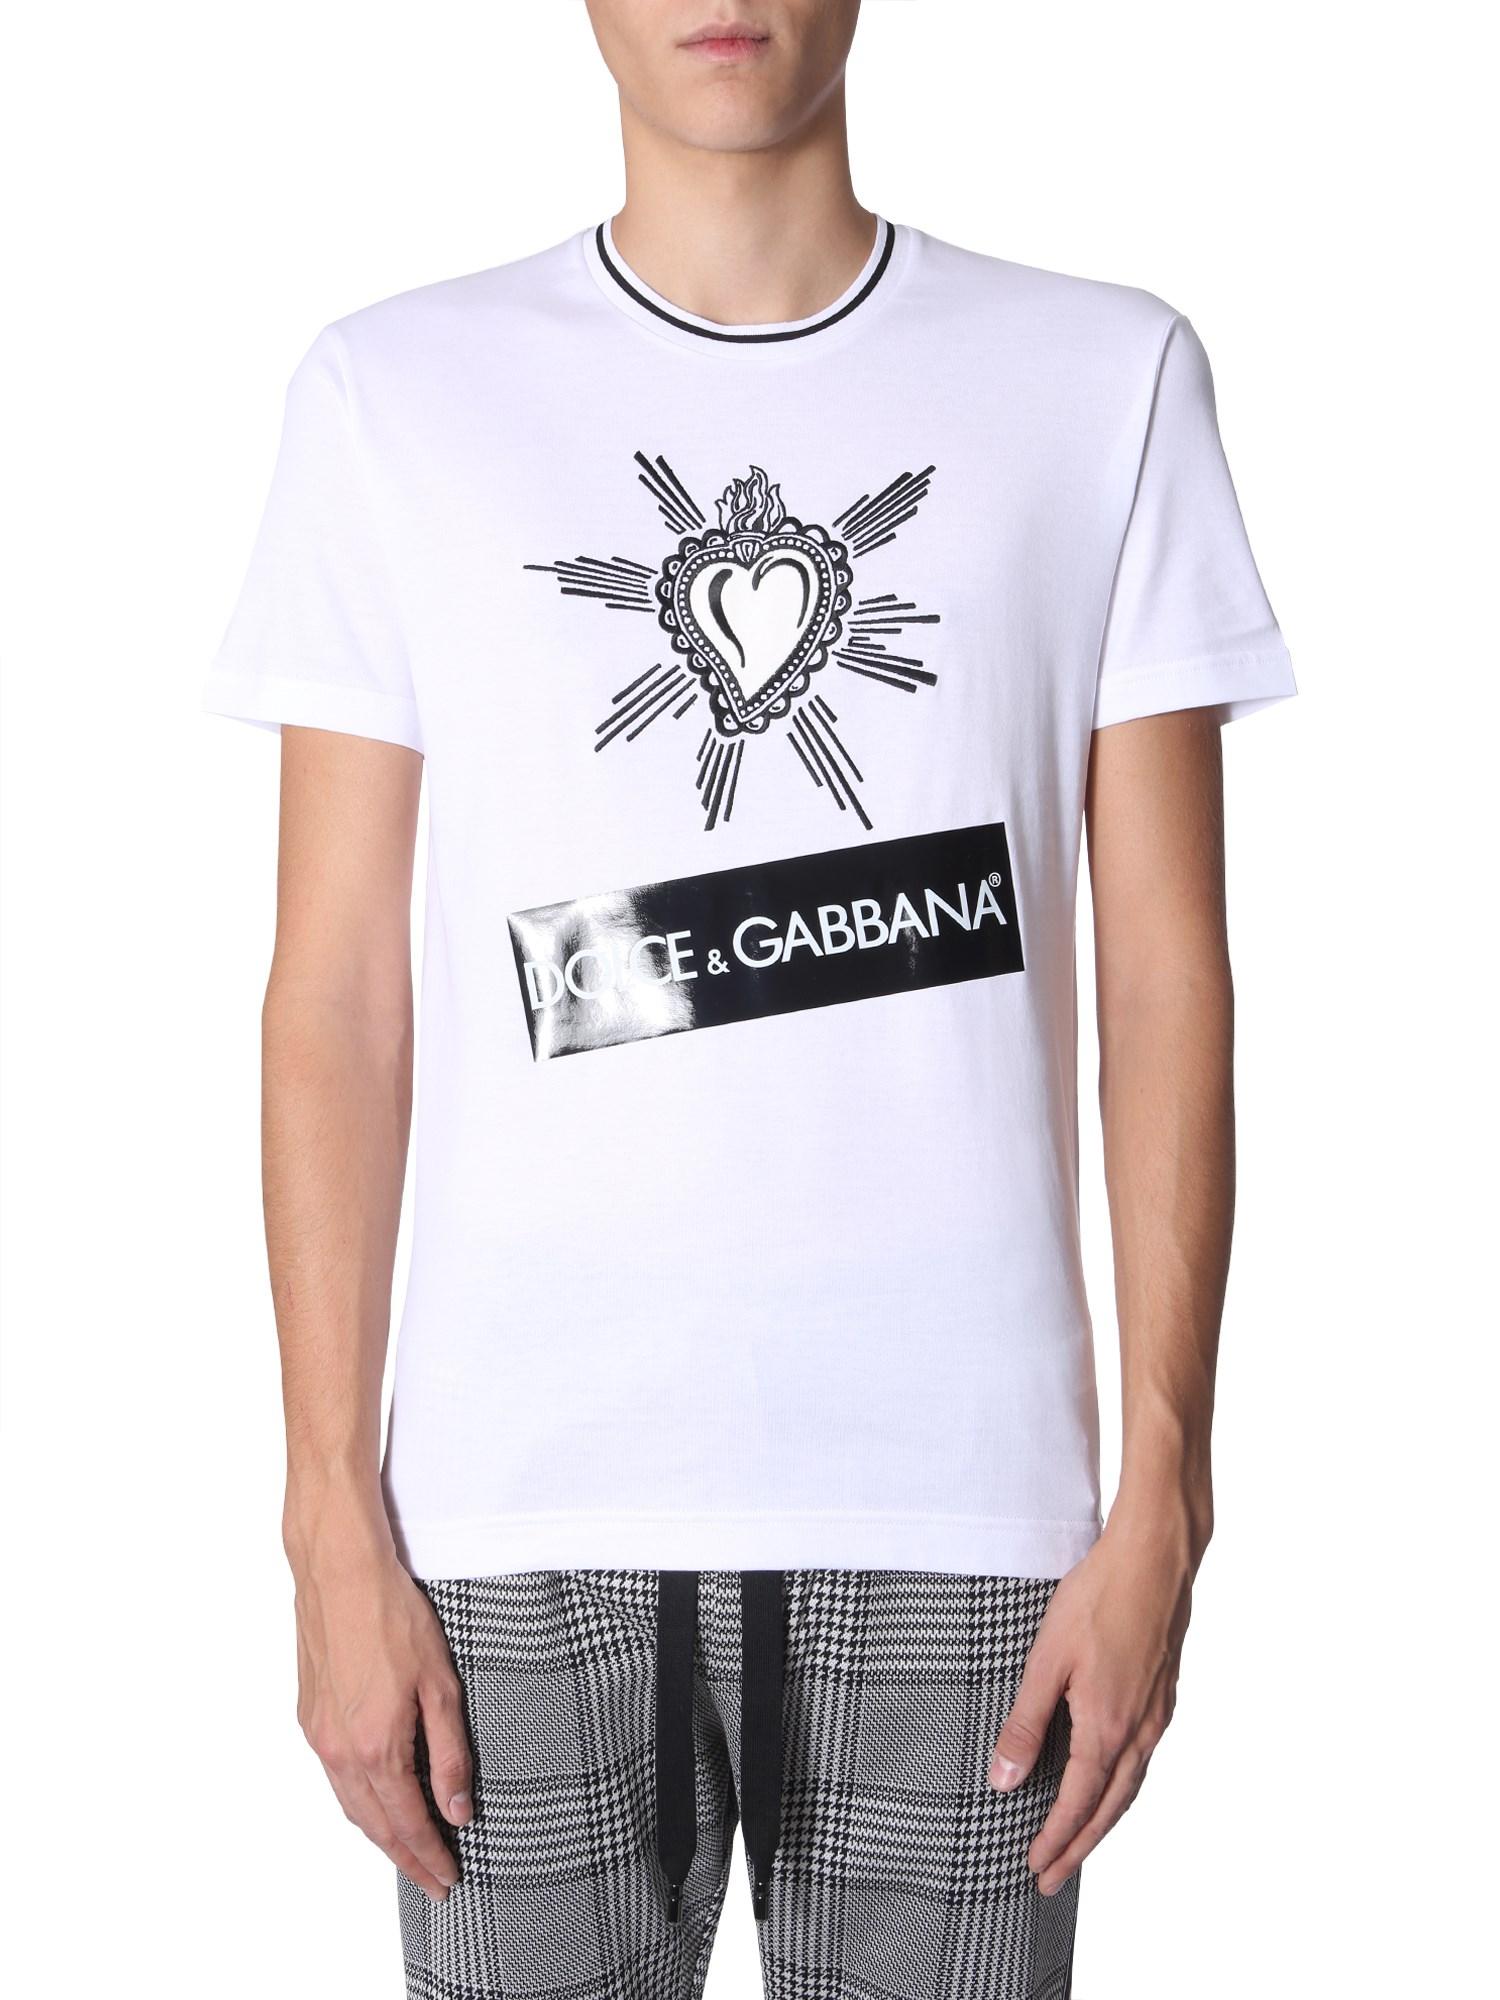 Dolce & Gabbana Heart Embroidered T-shirt in White for Men - Lyst